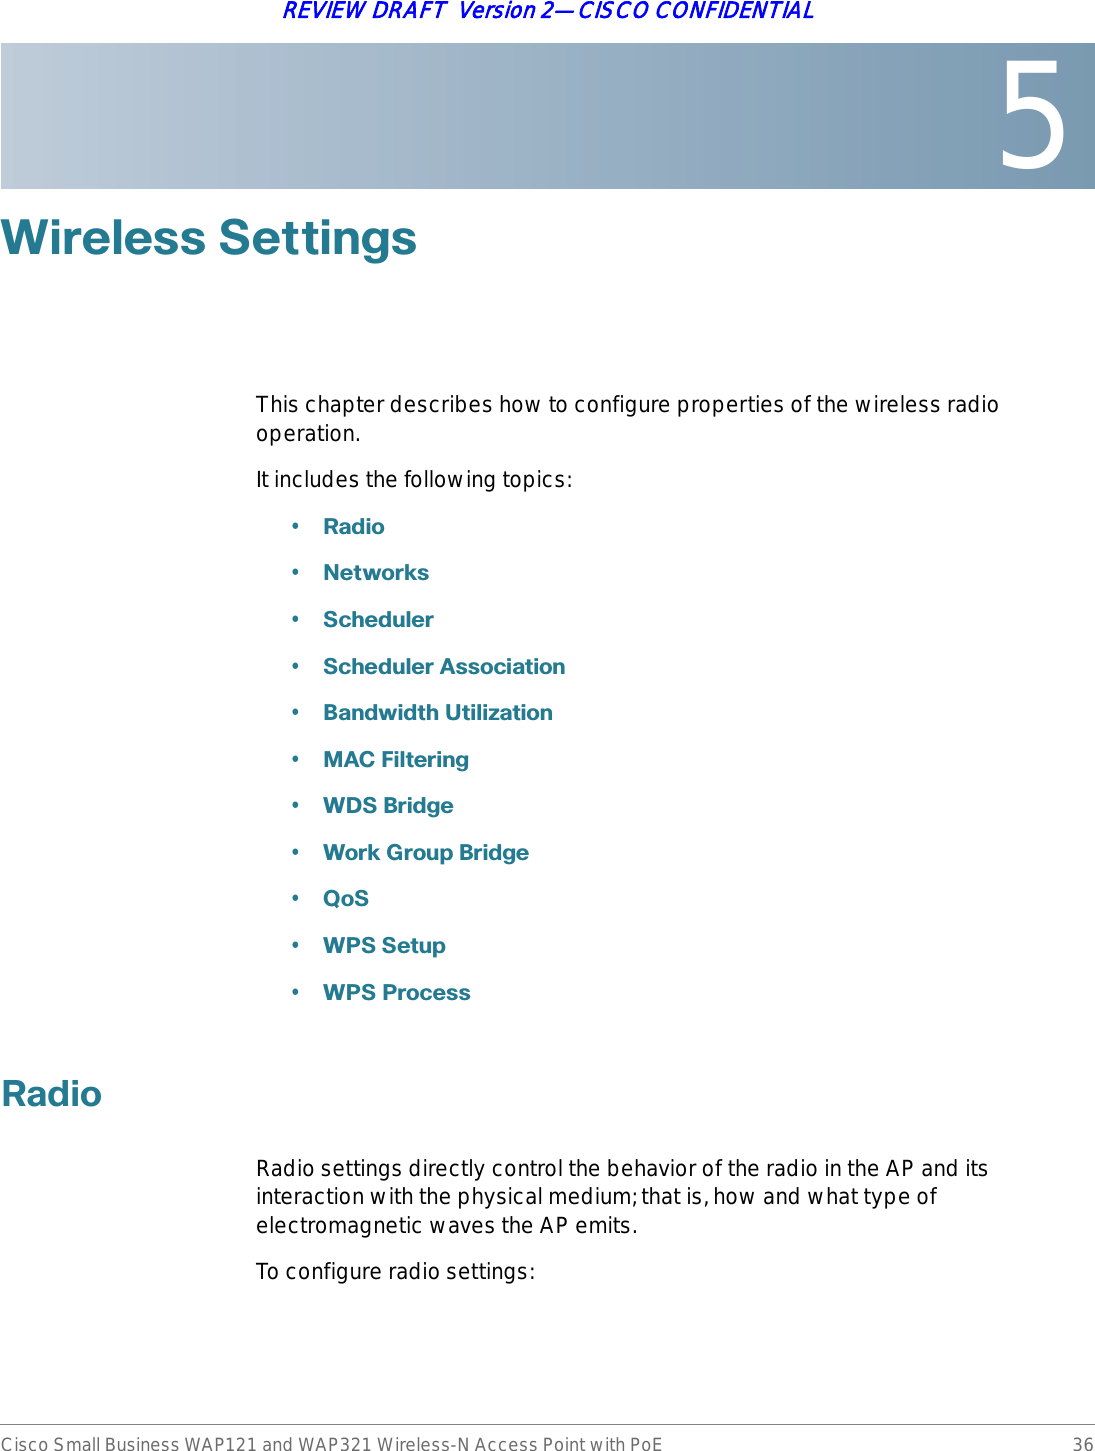 5Cisco Small Business WAP121 and WAP321 Wireless-N Access Point with PoE 36REVIEW DRAFT  Version 2—CISCO CONFIDENTIAL:LUHOHVV6HWWLQJVThis chapter describes how to configure properties of the wireless radio operation.It includes the following topics:•5DGLR•1HWZRUNV•6FKHGXOHU•6FKHGXOHU$VVRFLDWLRQ•%DQGZLGWK8WLOL]DWLRQ•0$&amp;)LOWHULQJ•:&apos;6%ULGJH•:RUN*URXS%ULGJH•4R6•:366HWXS•:363URFHVV5DGLRRadio settings directly control the behavior of the radio in the AP and its interaction with the physical medium; that is, how and what type of electromagnetic waves the AP emits.To configure radio settings: